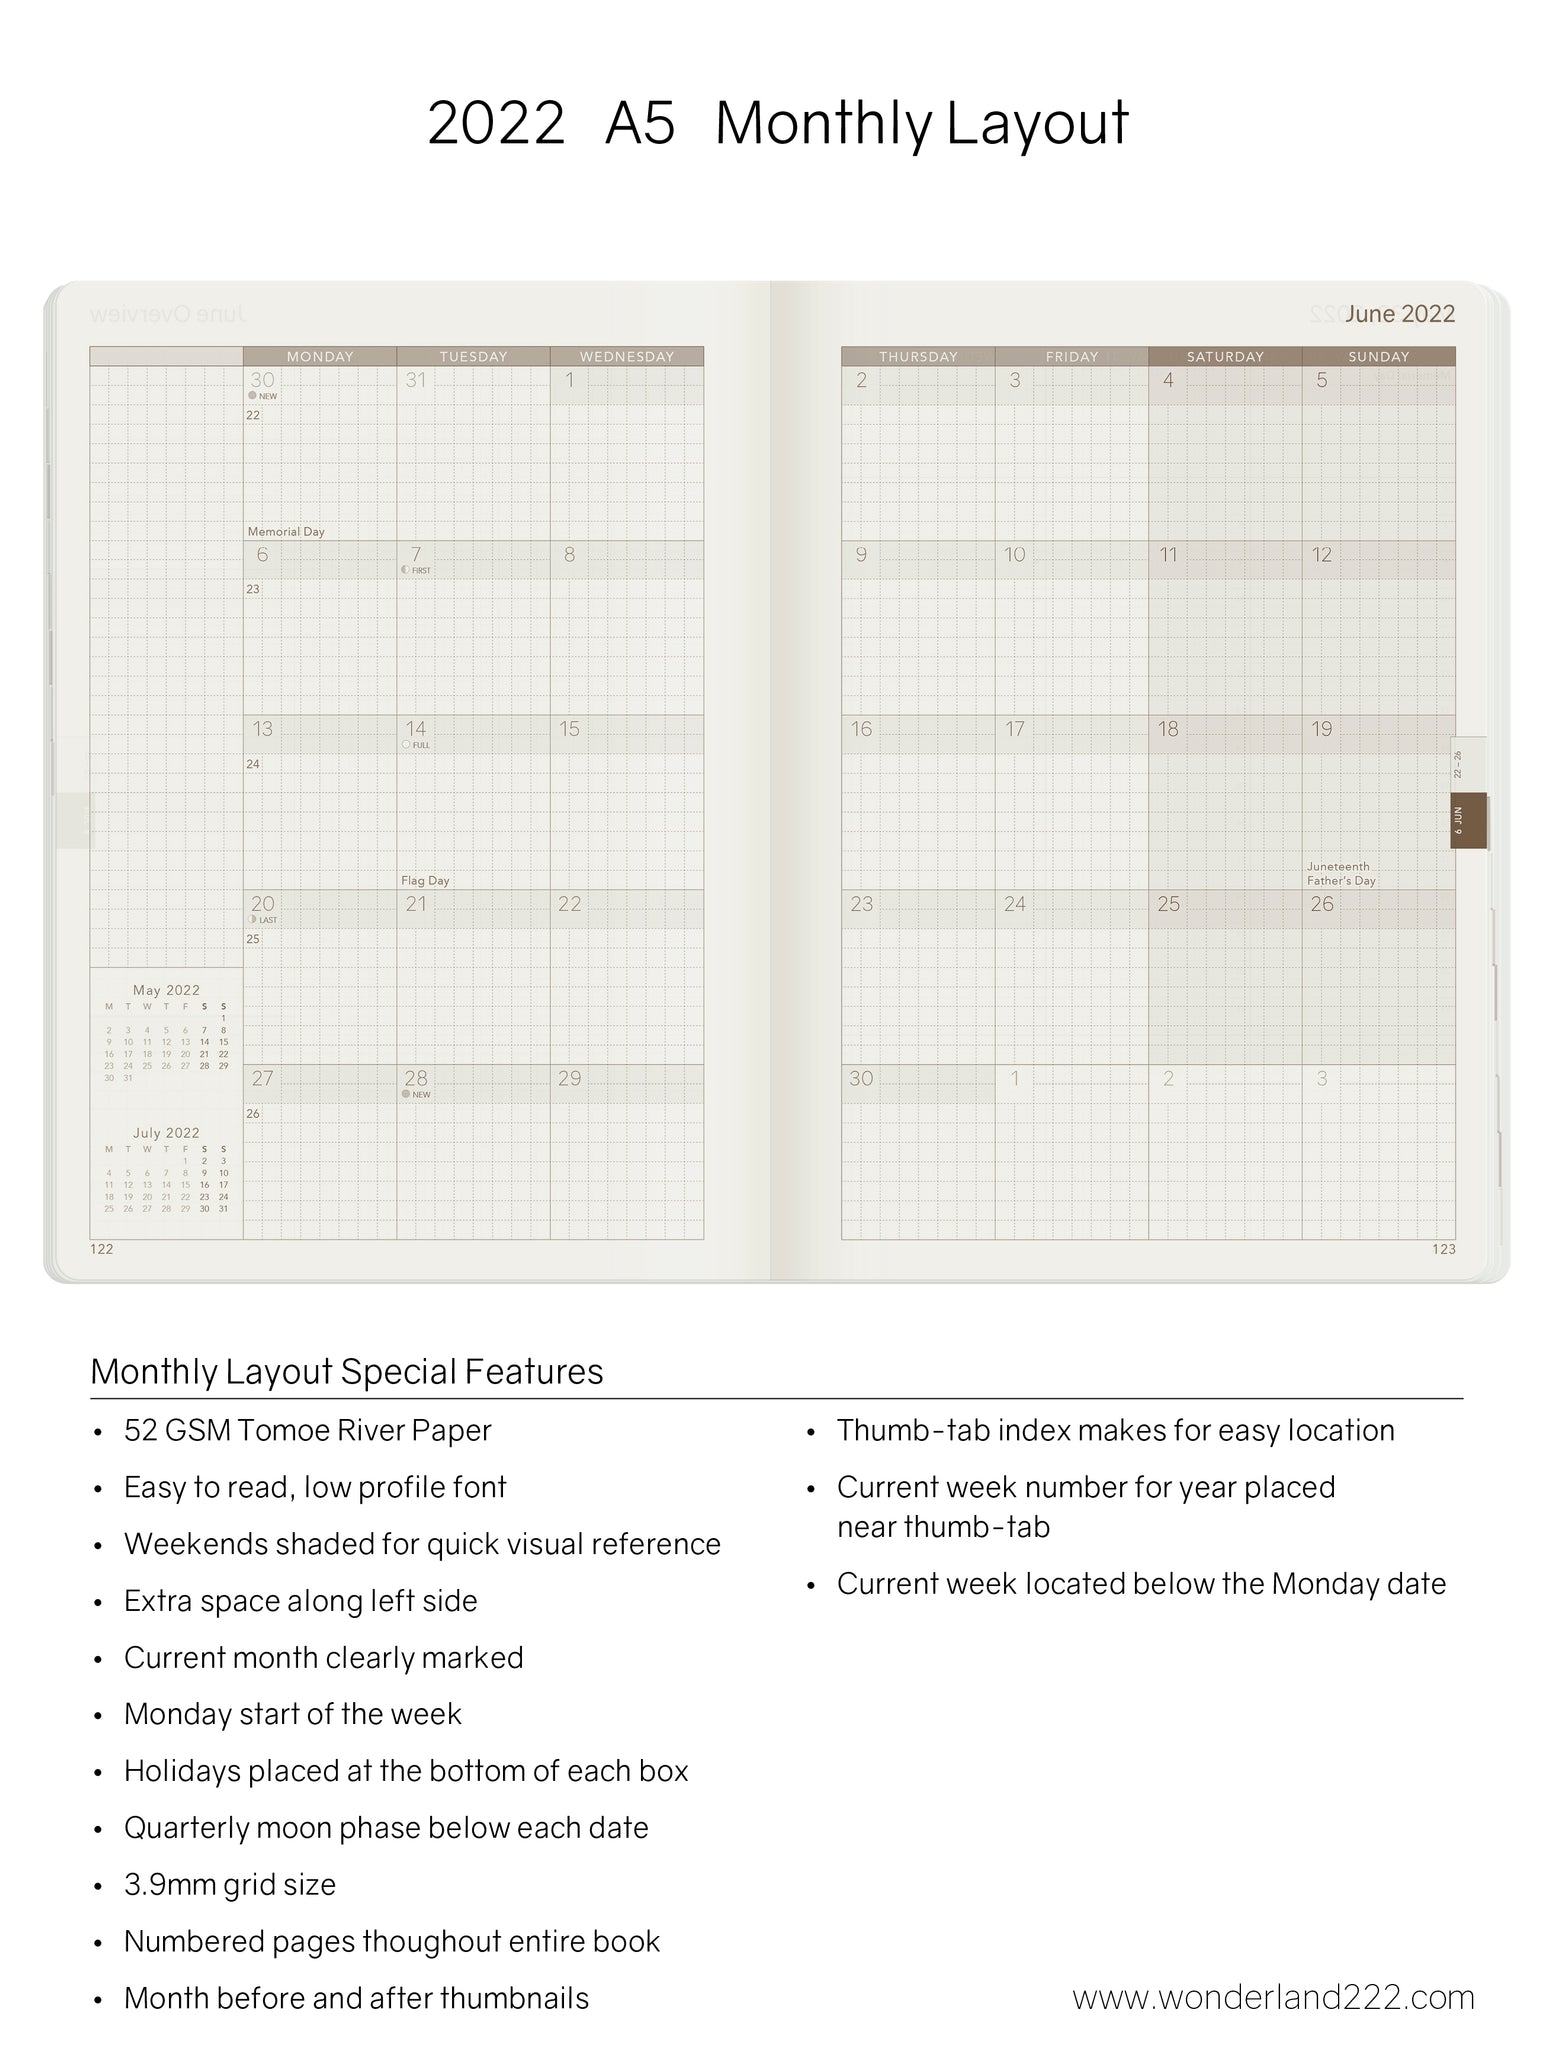 Overstock Sale! - A5 2022 Weekly Planner - 52gsm Tomoe River Paper